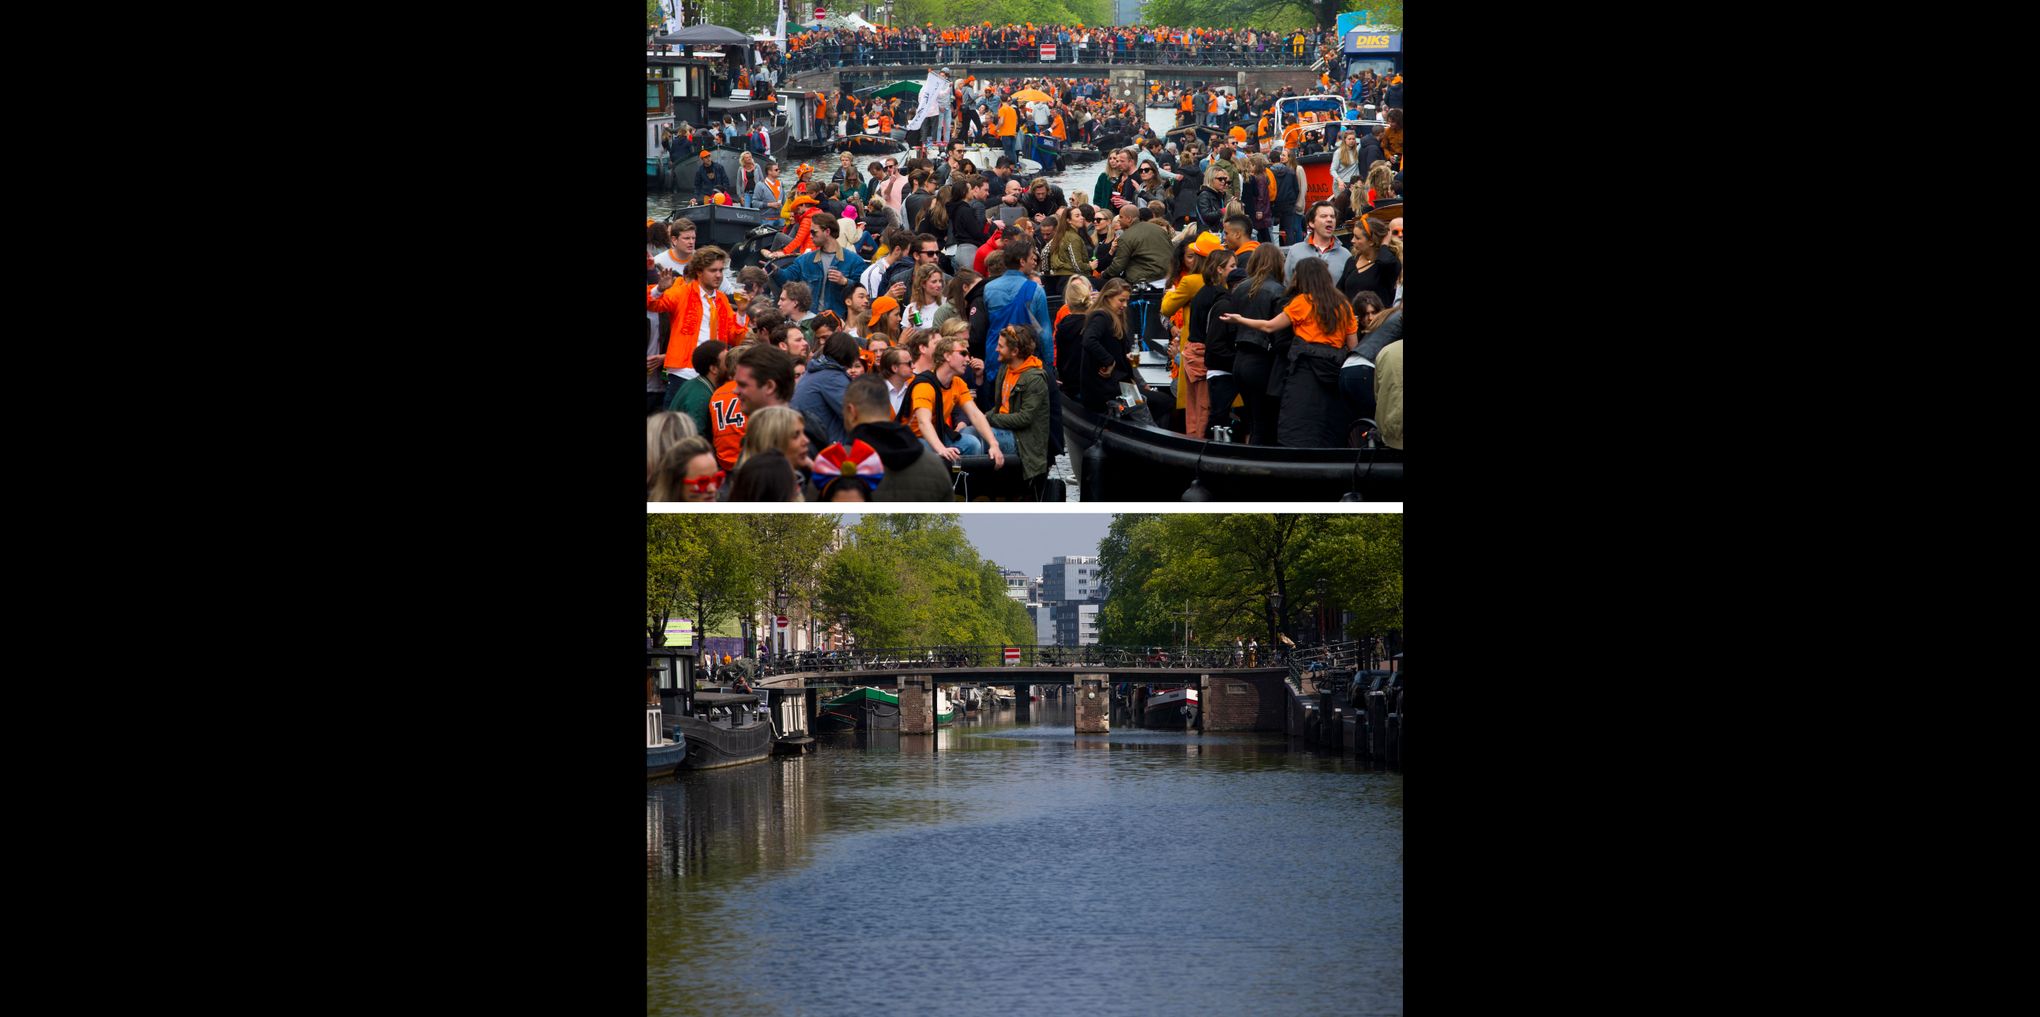 King's Day in The Hague: What events are happening in 2020